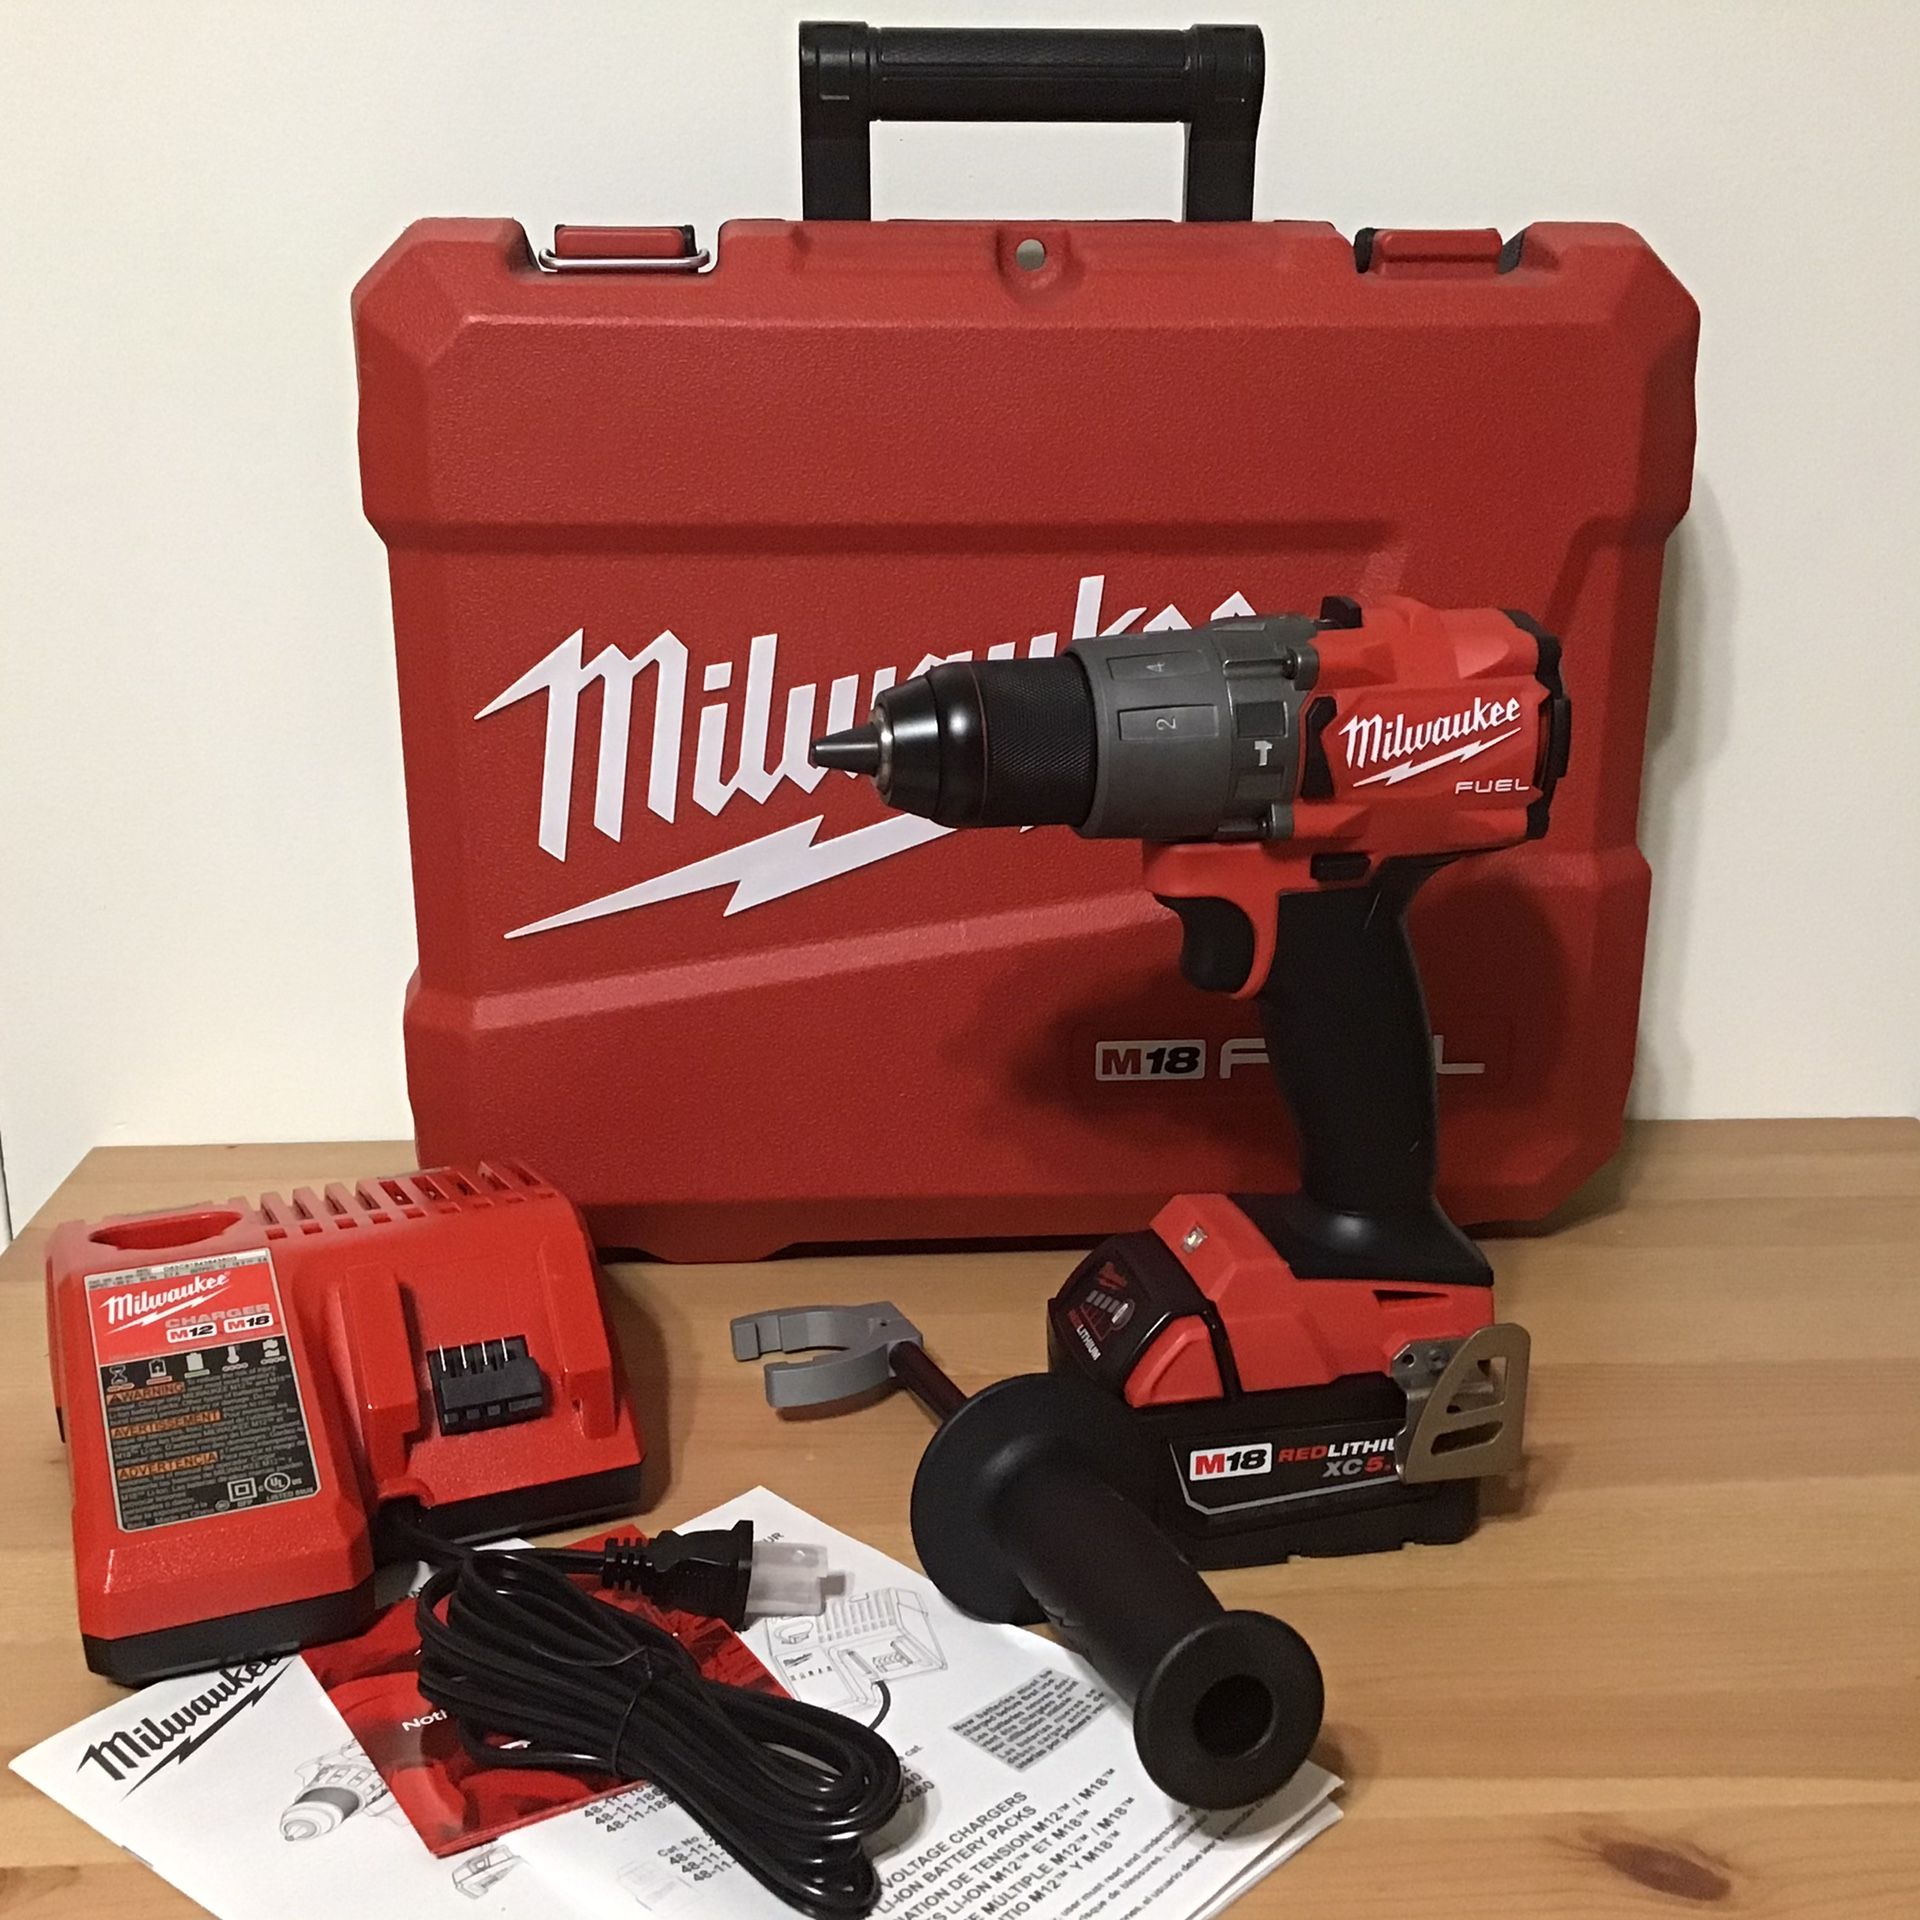 Milwaukee Hammer/Drill w/ charger and battery 5 Amp in the case J77AD1844 $125